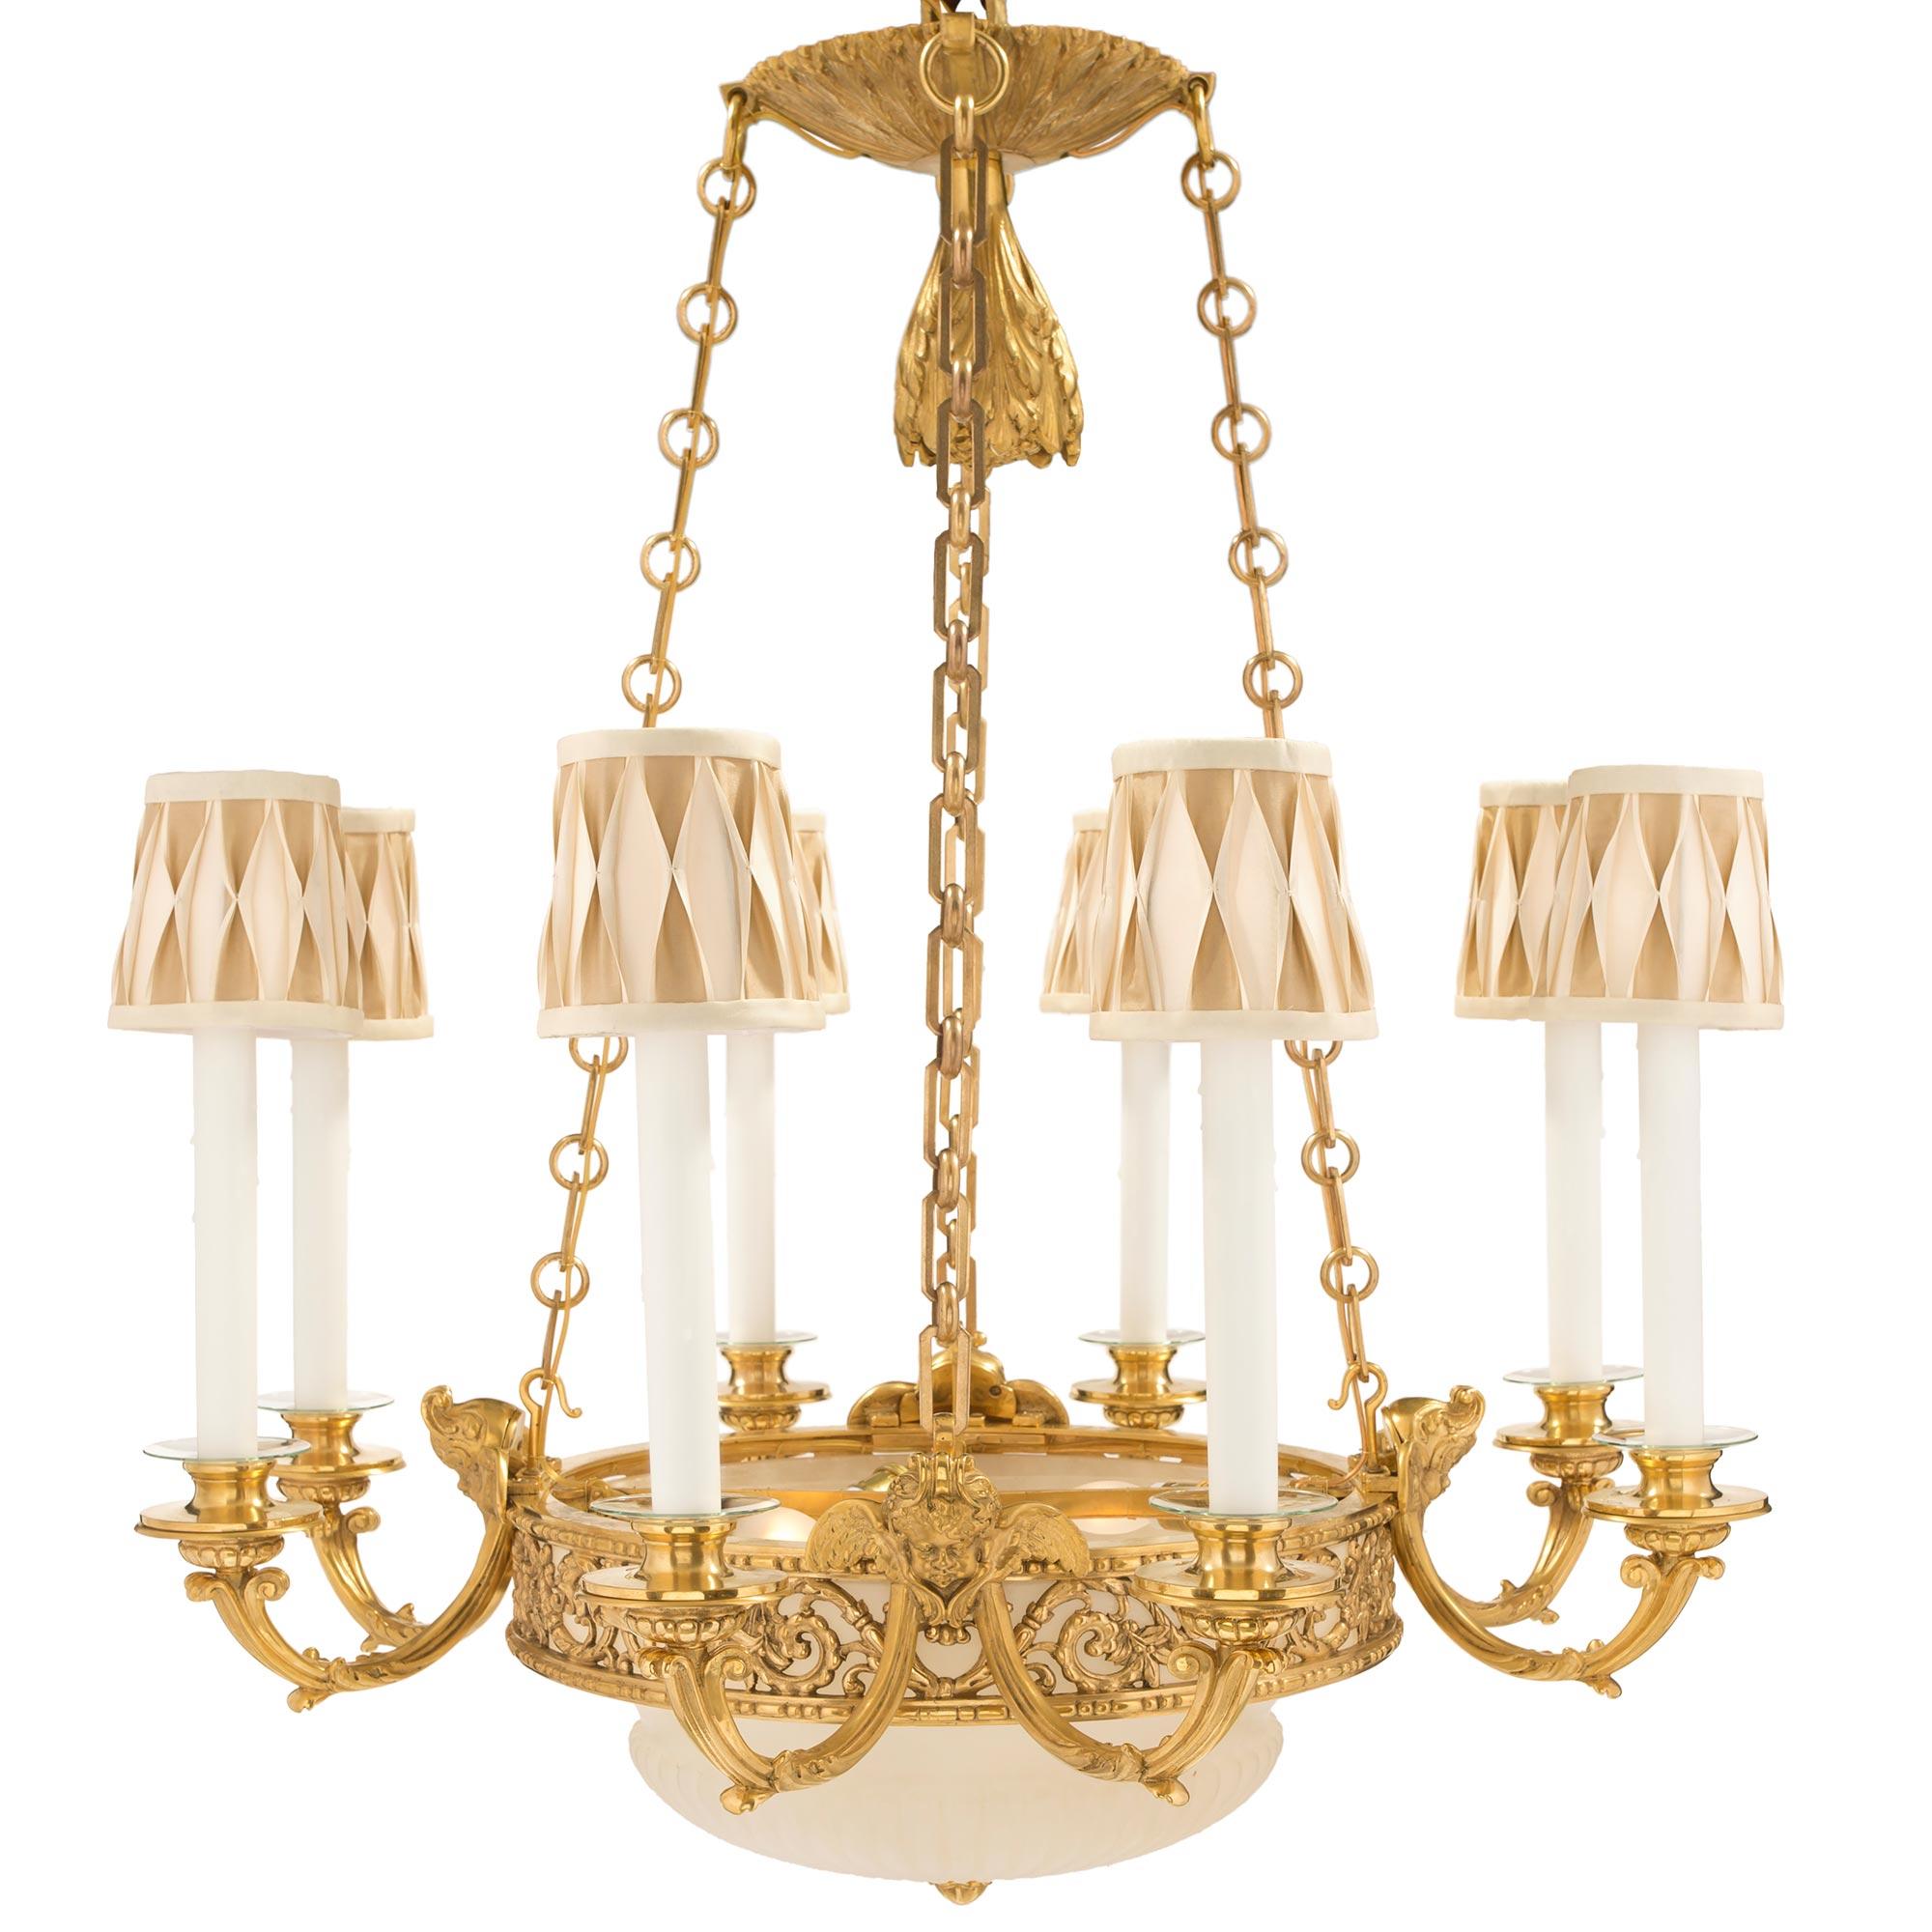 A most elegant French 19th century Louis XVI st. ormolu and alabaster twelve light chandelier. The chandelier has a bottom reeded cream colored alabaster dome with a central ormolu finial. The dome is held by a central band with foliate scrolls and